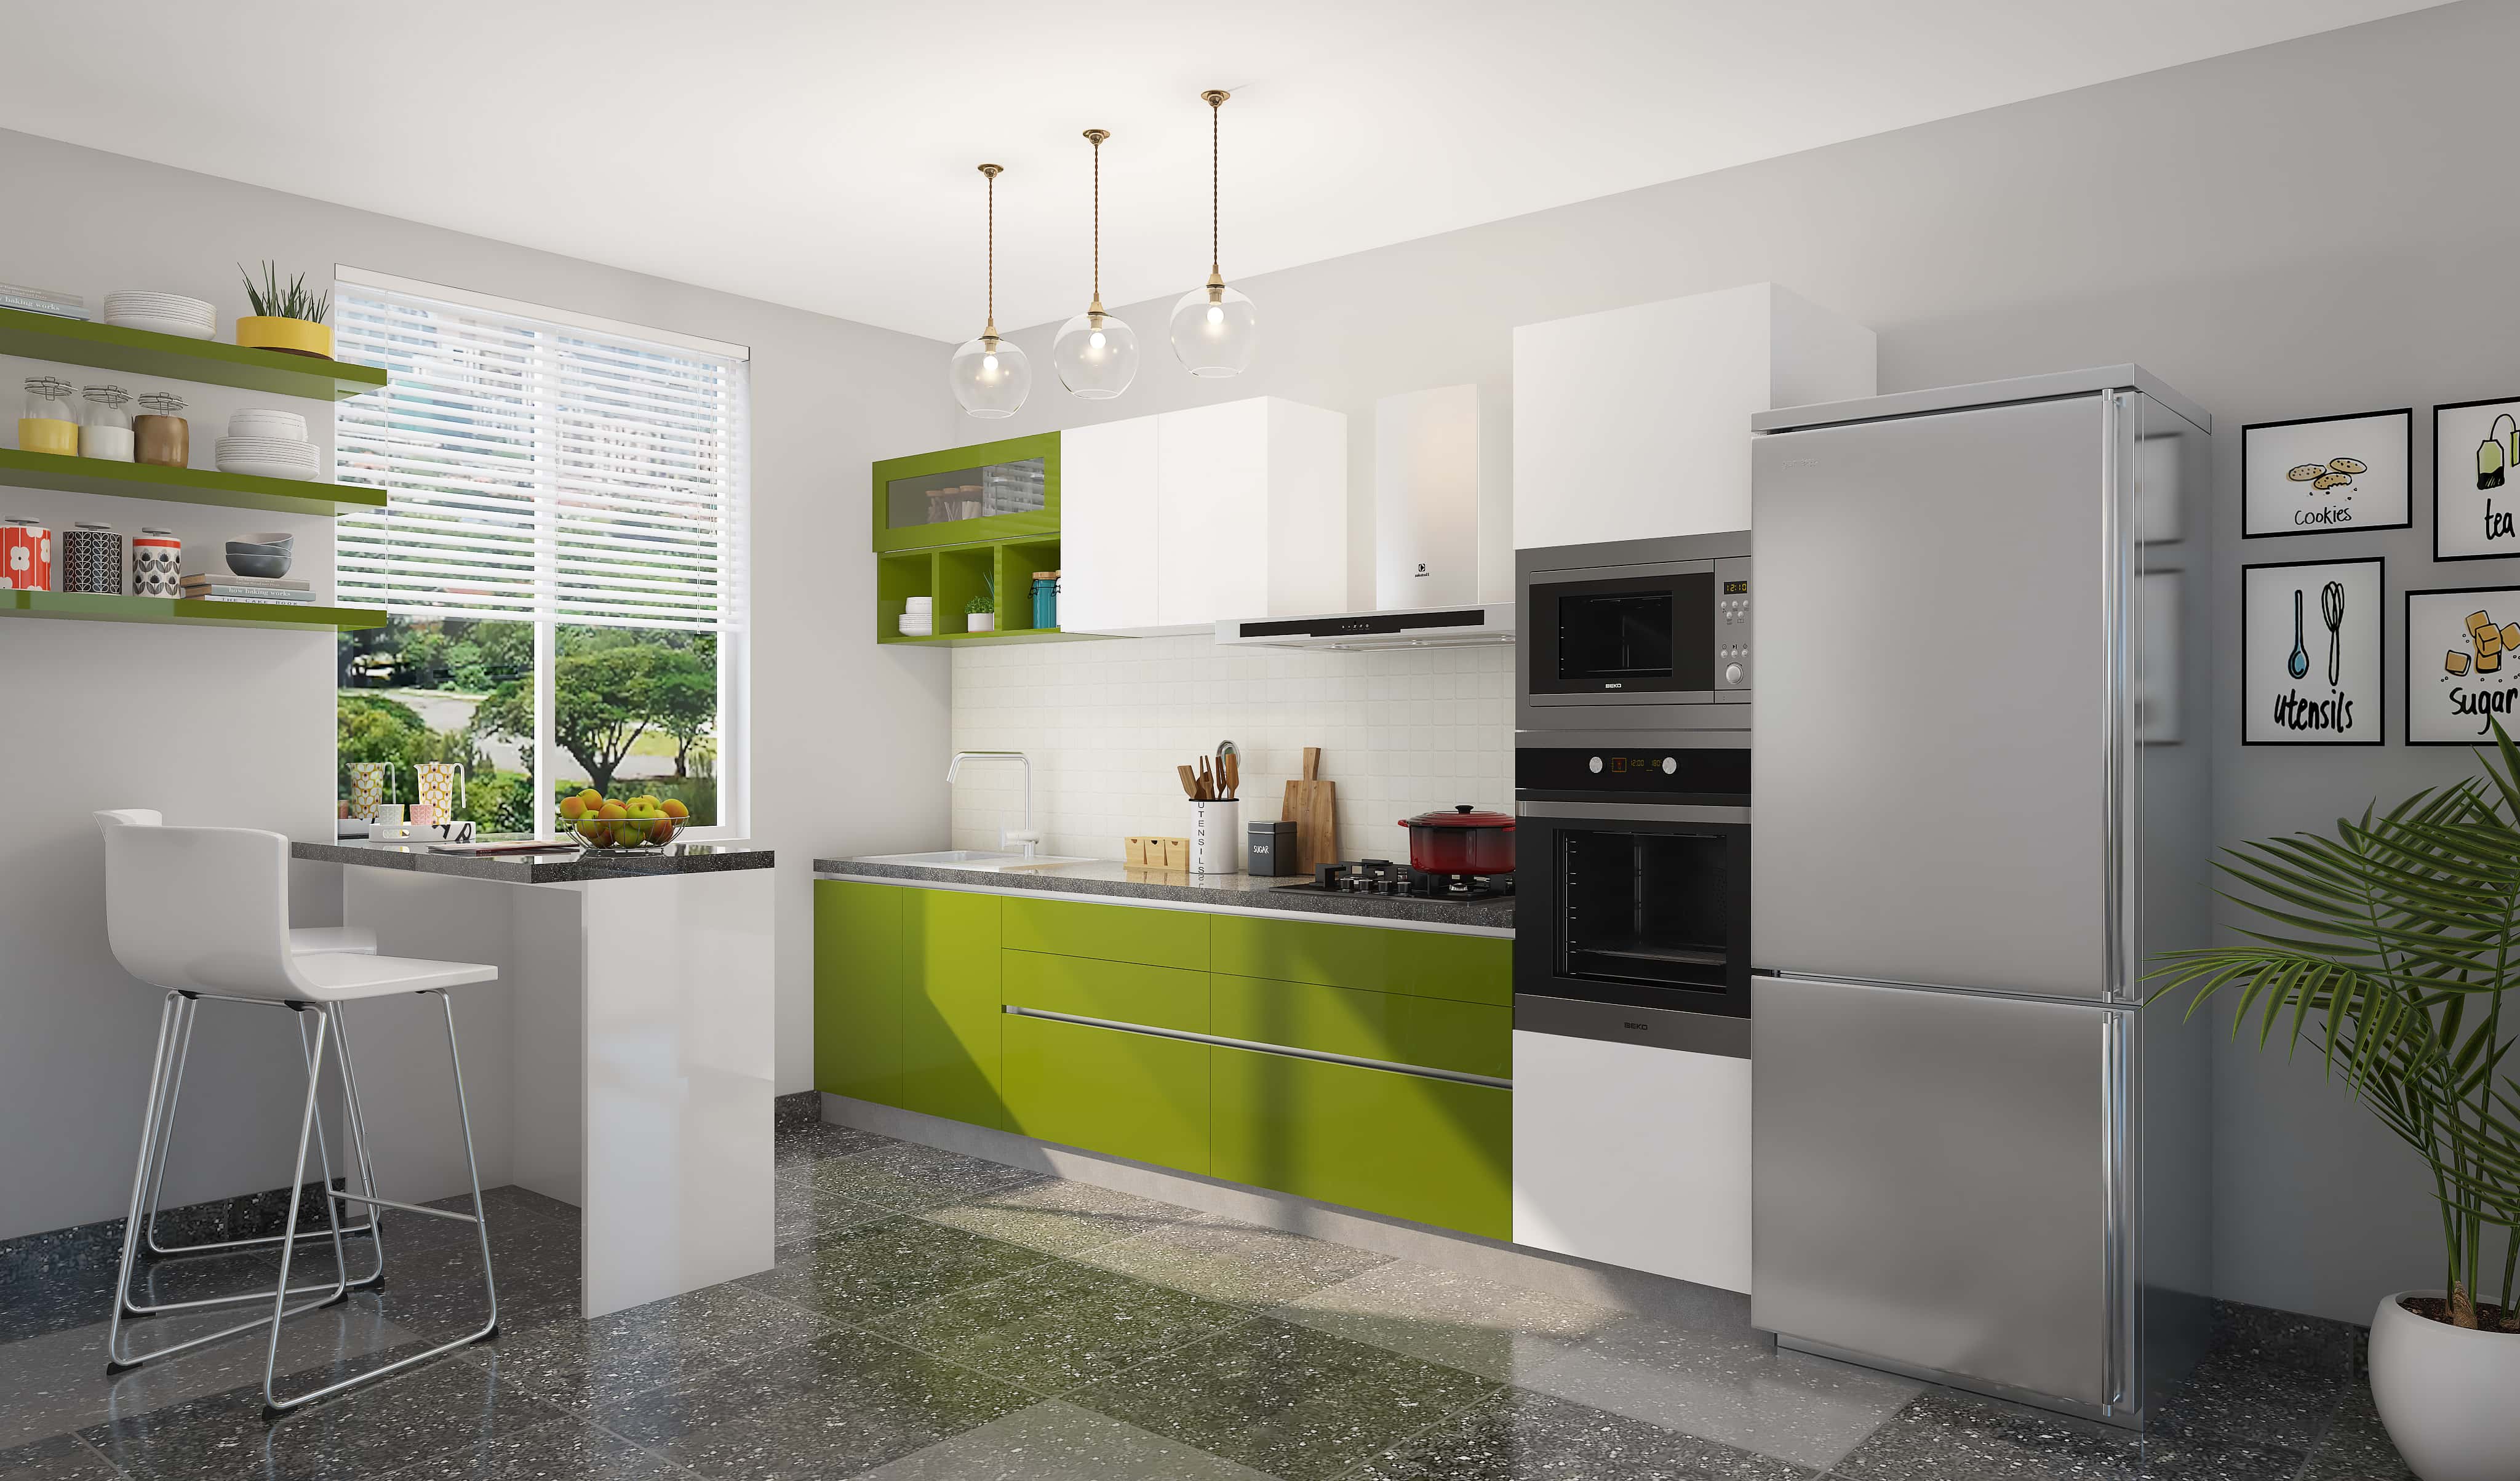 Kitchen Trends Two Toned Kitchen Cabinets   HomeLane Blog